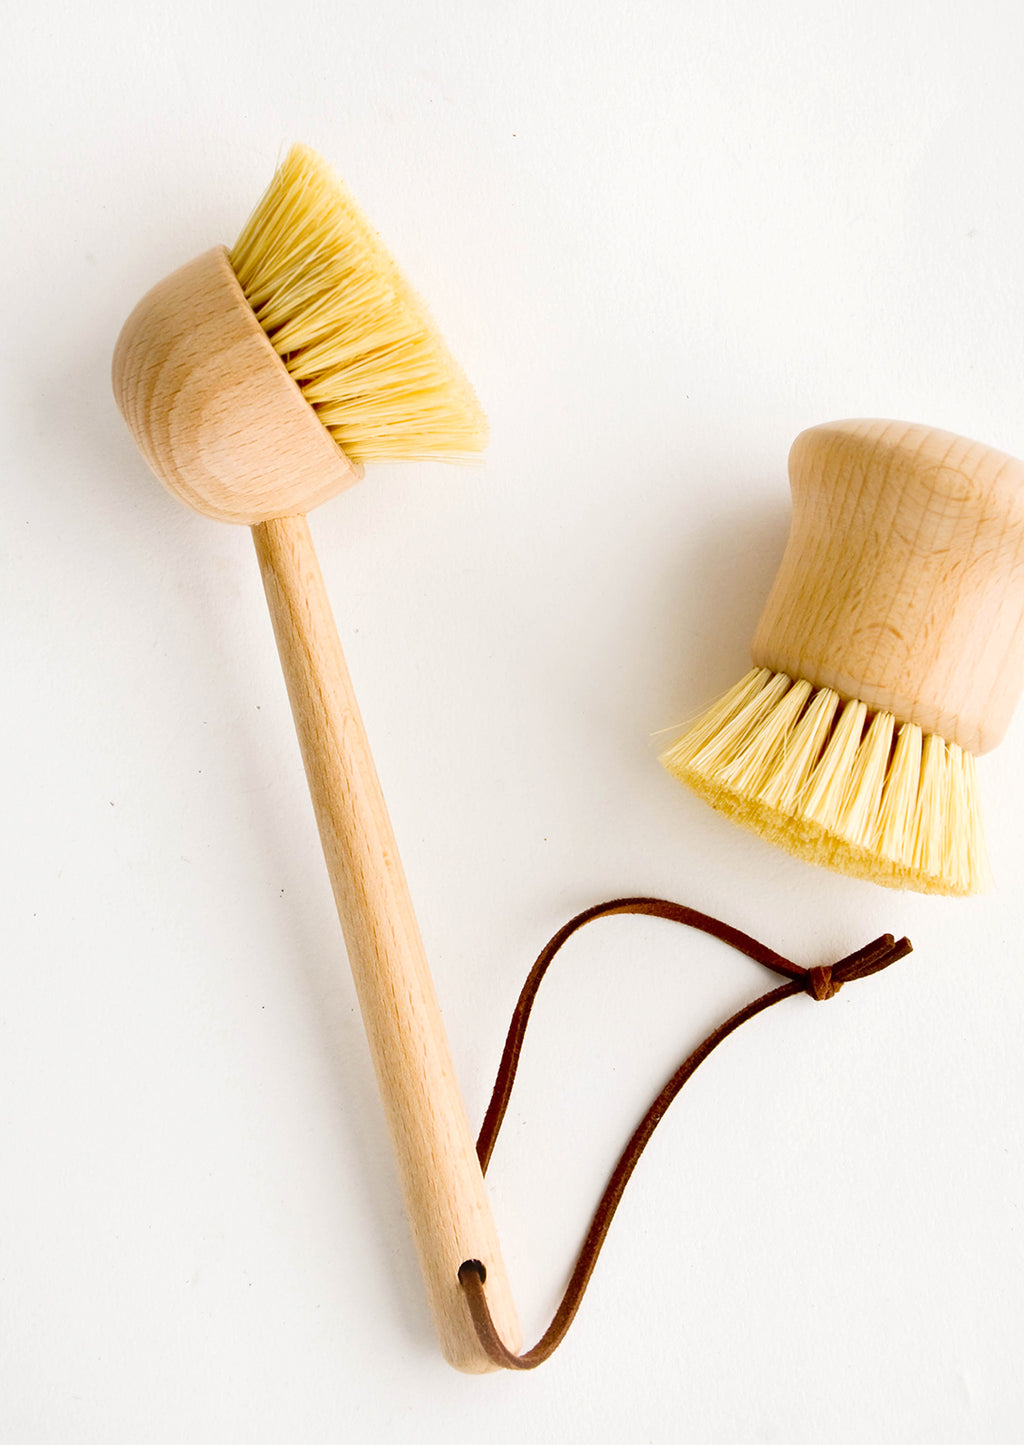 Short Round [$12.00]: Dish brushes made from natural beechwood